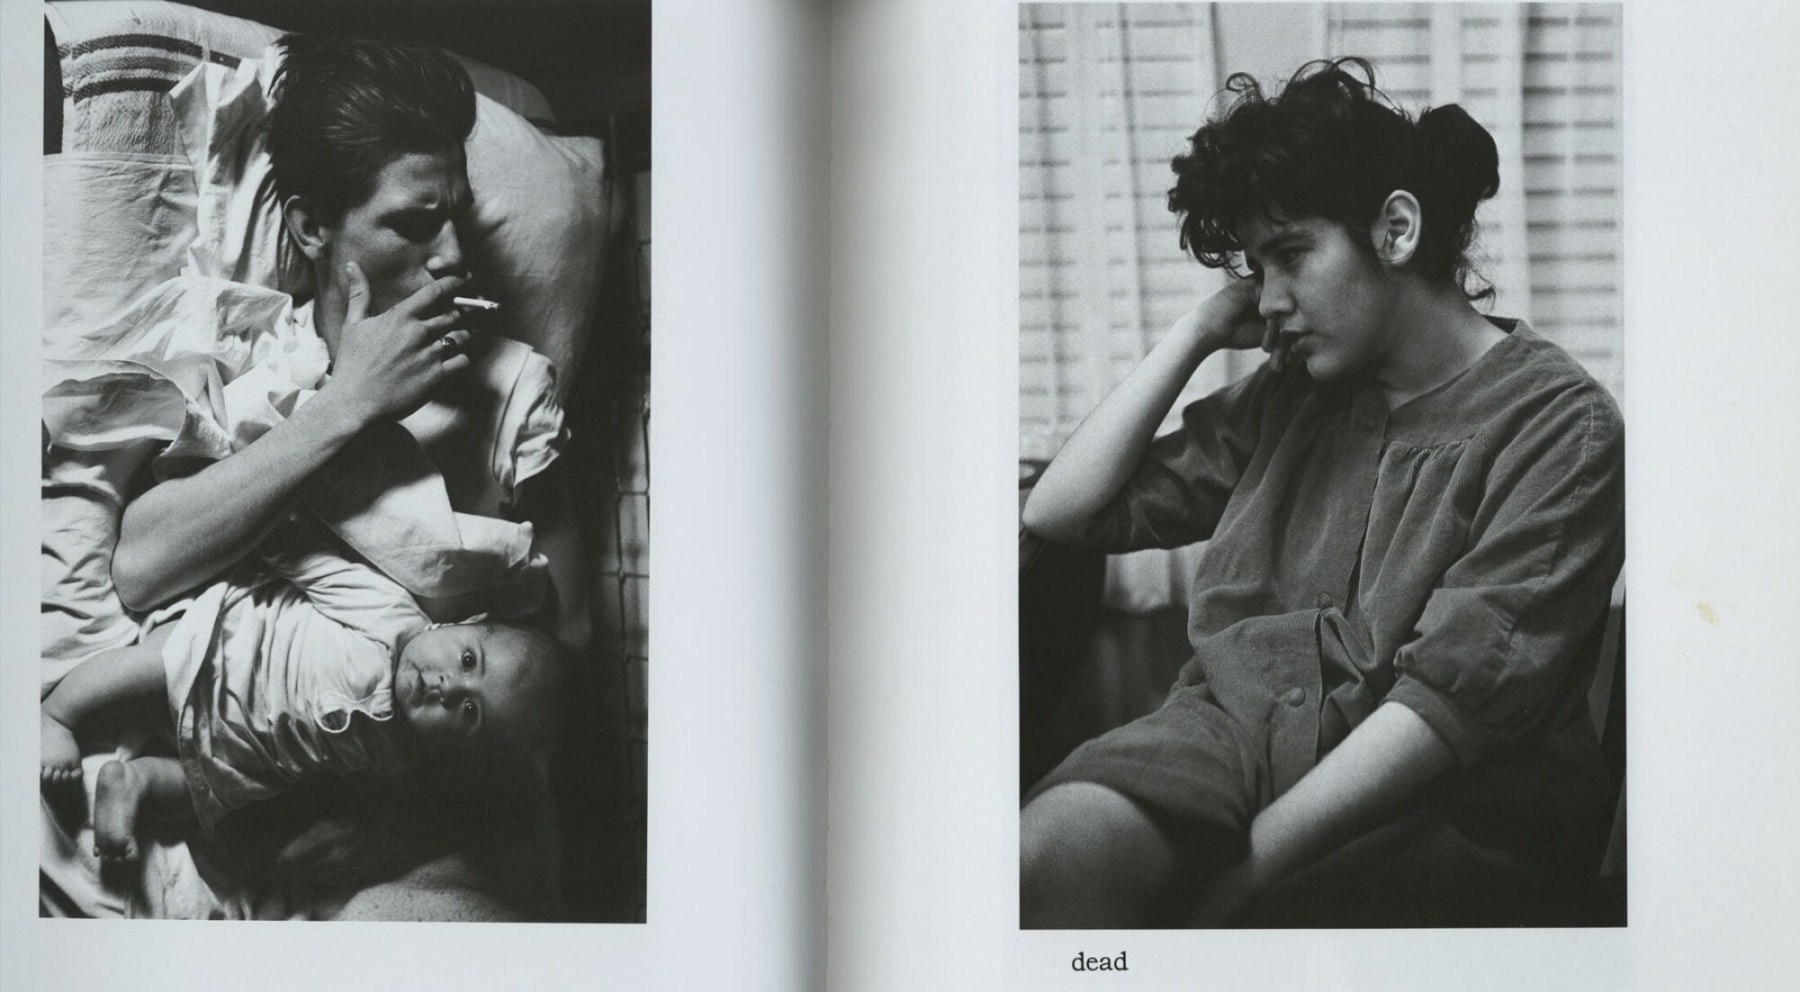 Photo of a book spread with 2 black and white photographs, 1 of a man with a baby, the other of a woman sitting in a chair